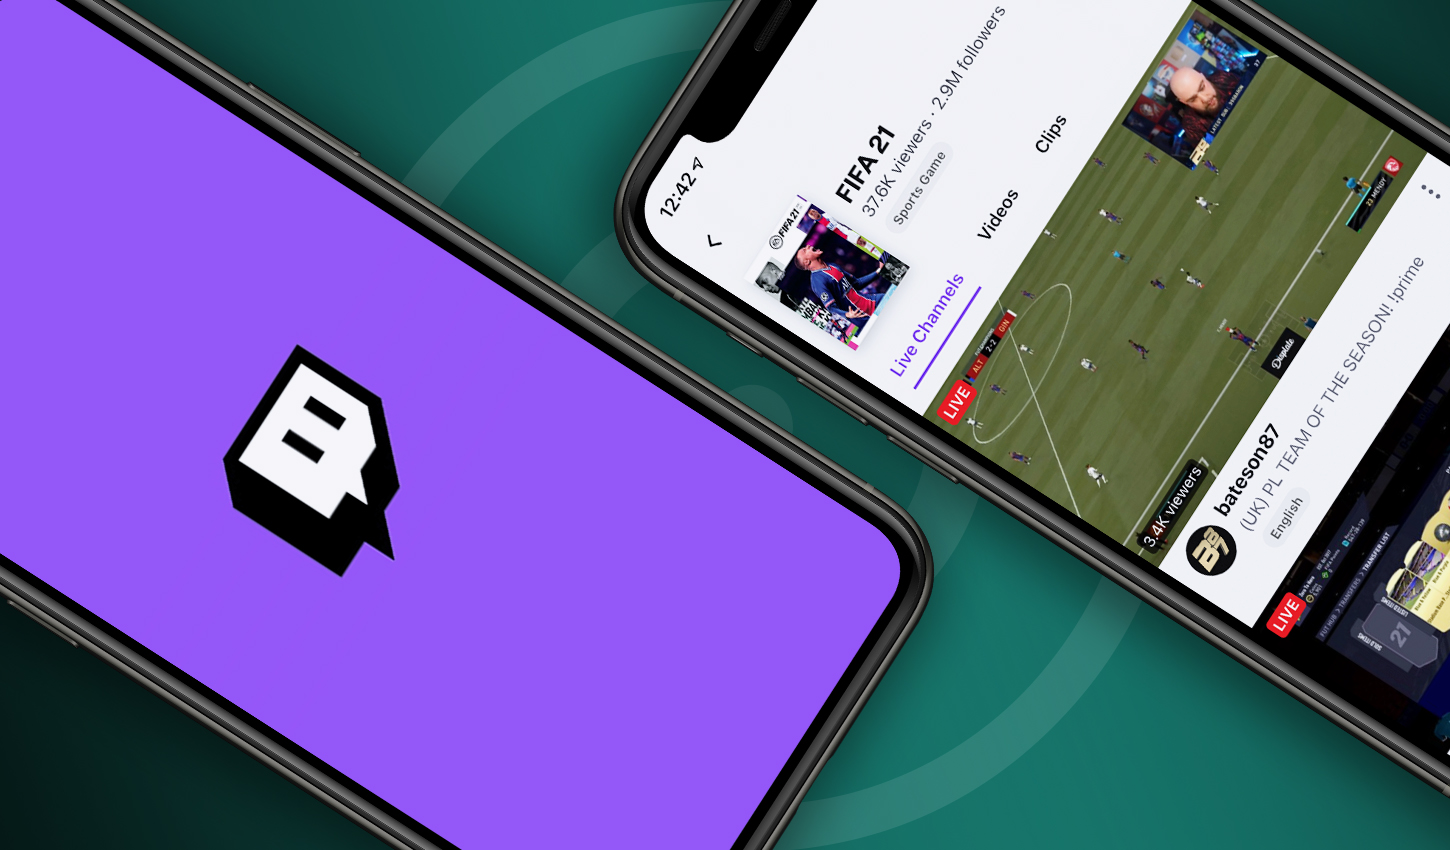 FIFA Mobile - Twitch